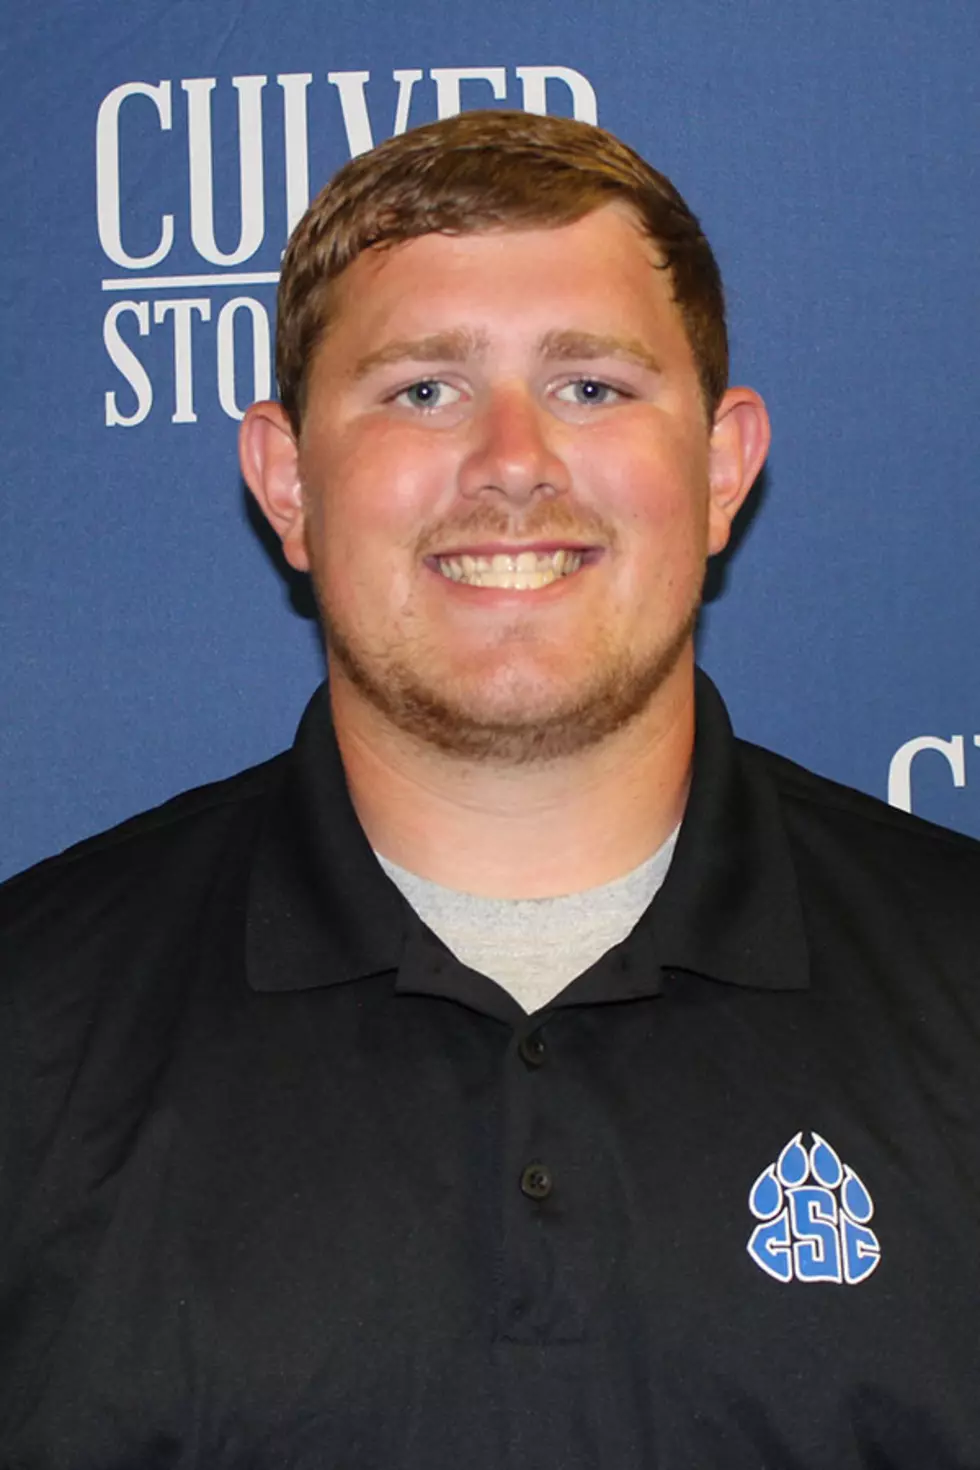 More All America Honors For a Culver Stockton Lineman